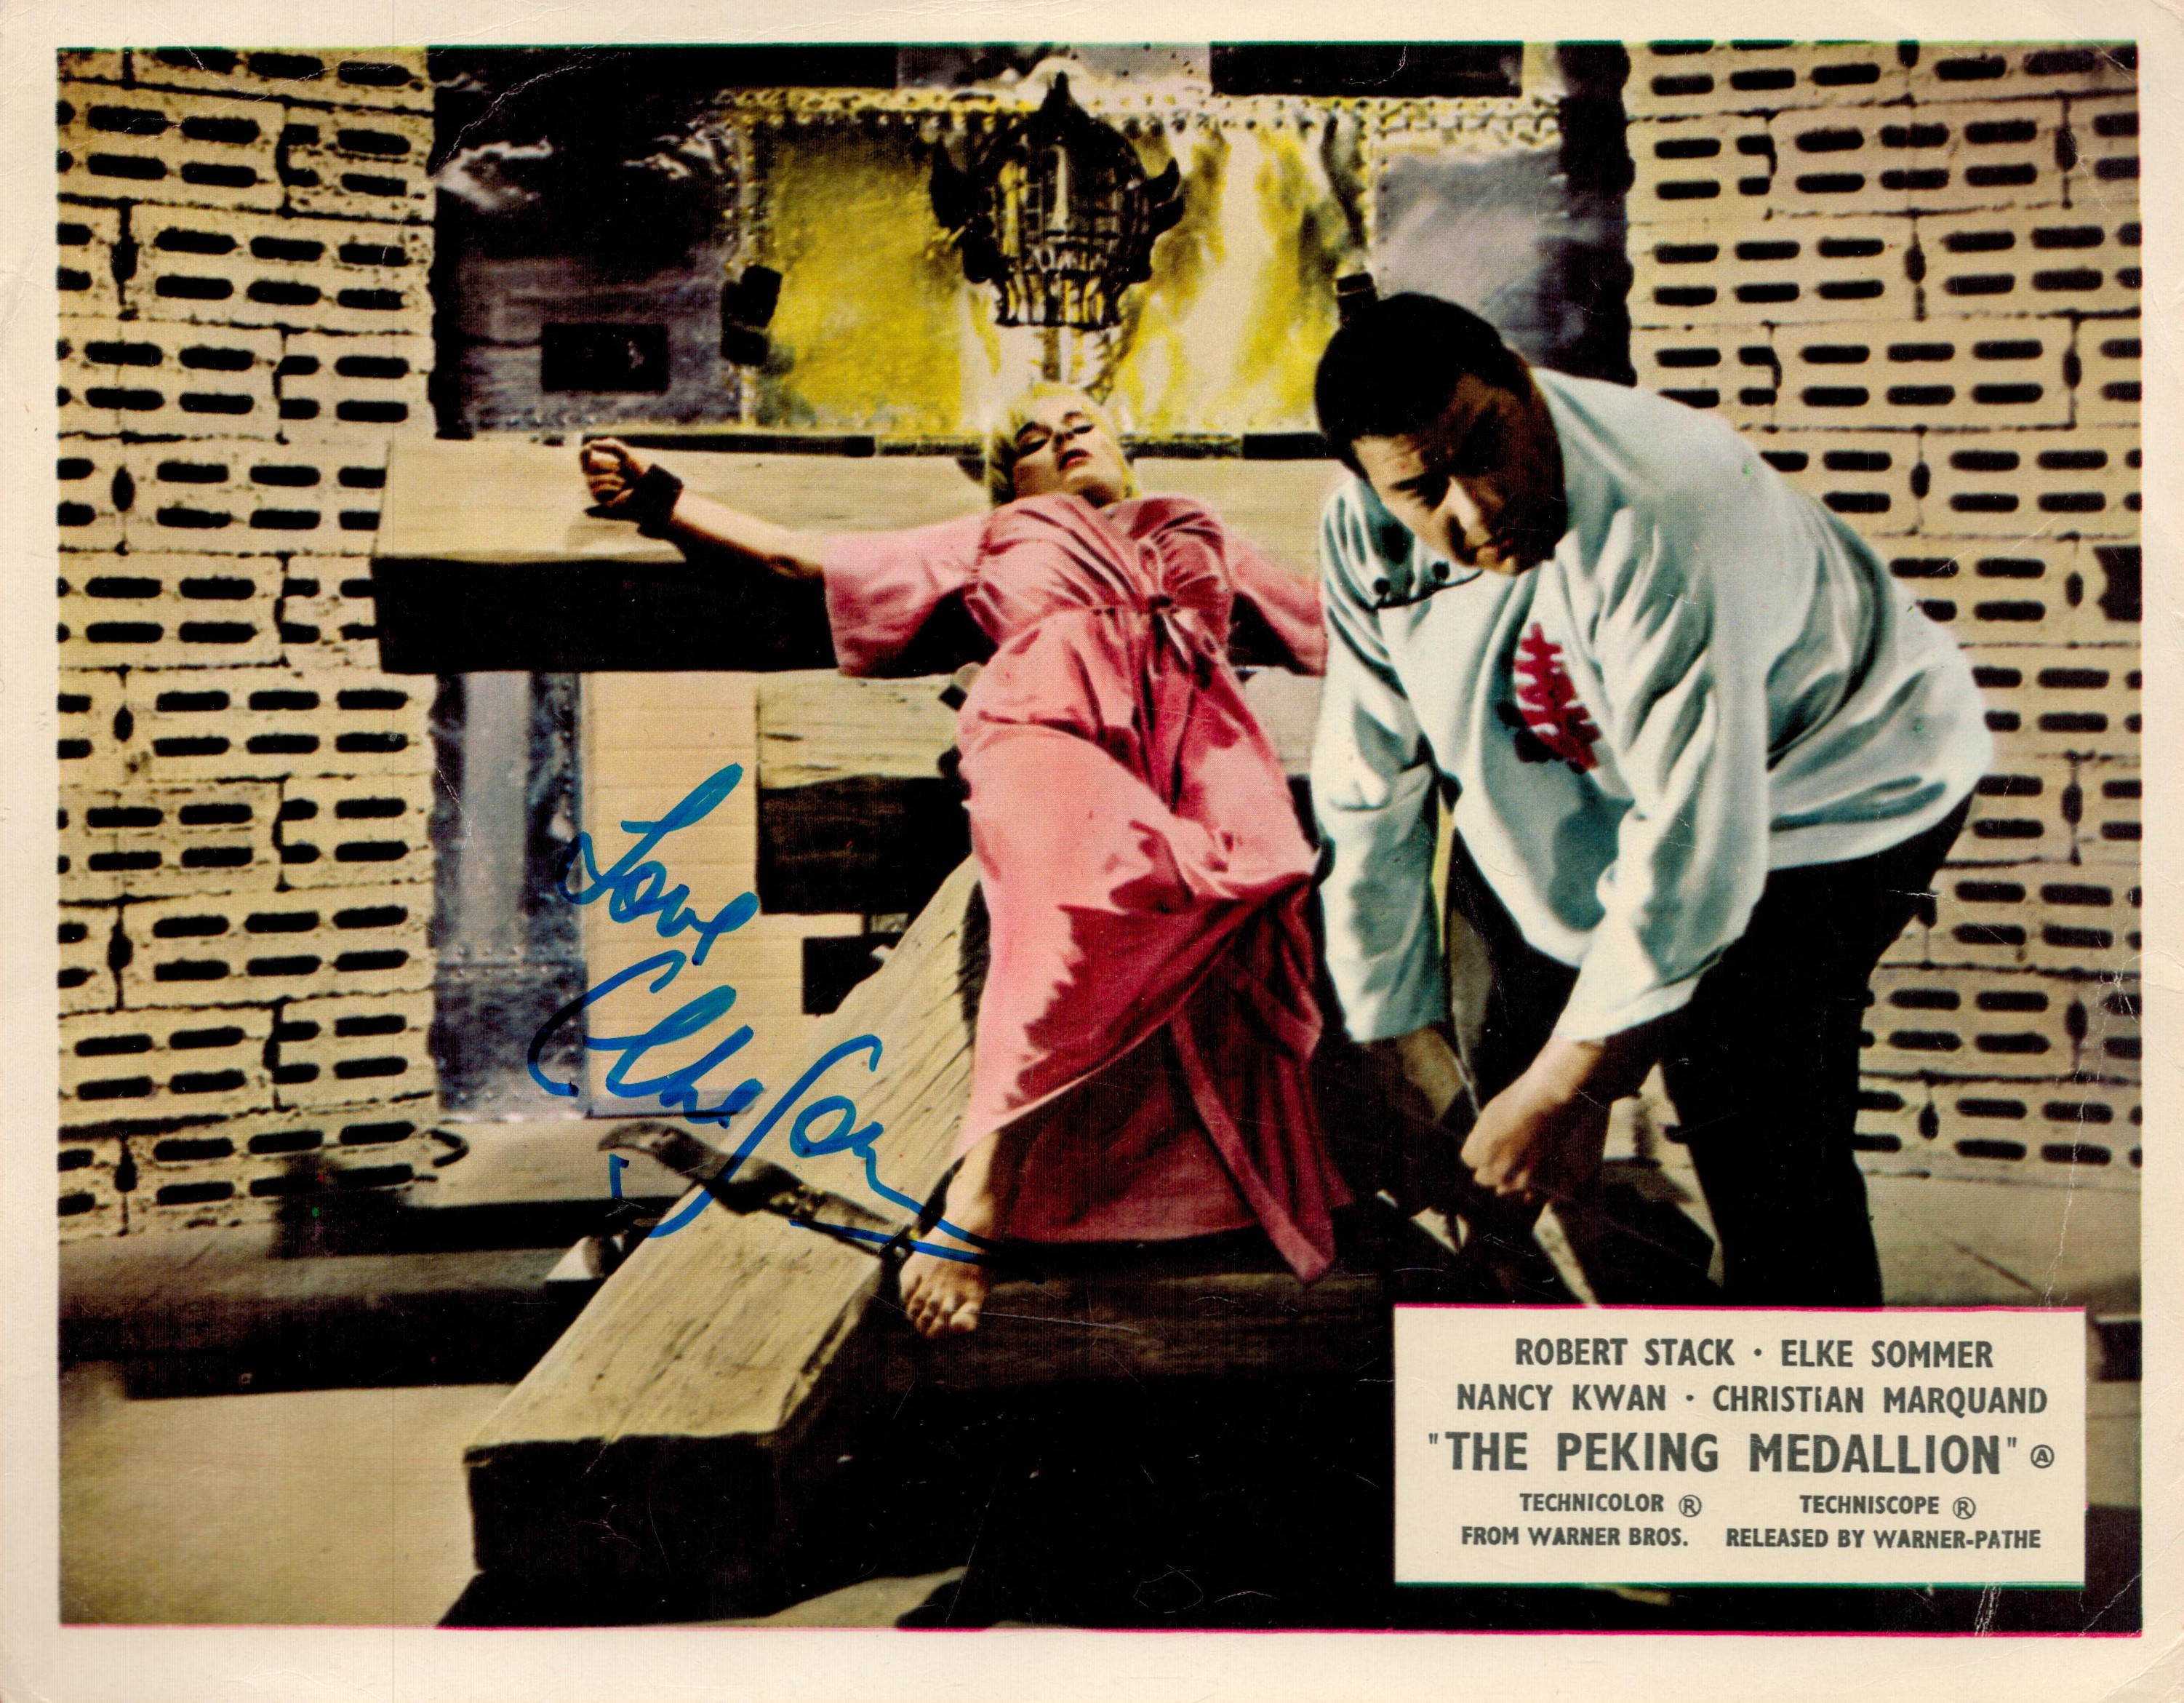 ELKE SOMMER Actress signed 'The Peking Medallion' 8x10 Lobby Photo. Good condition. All autographs